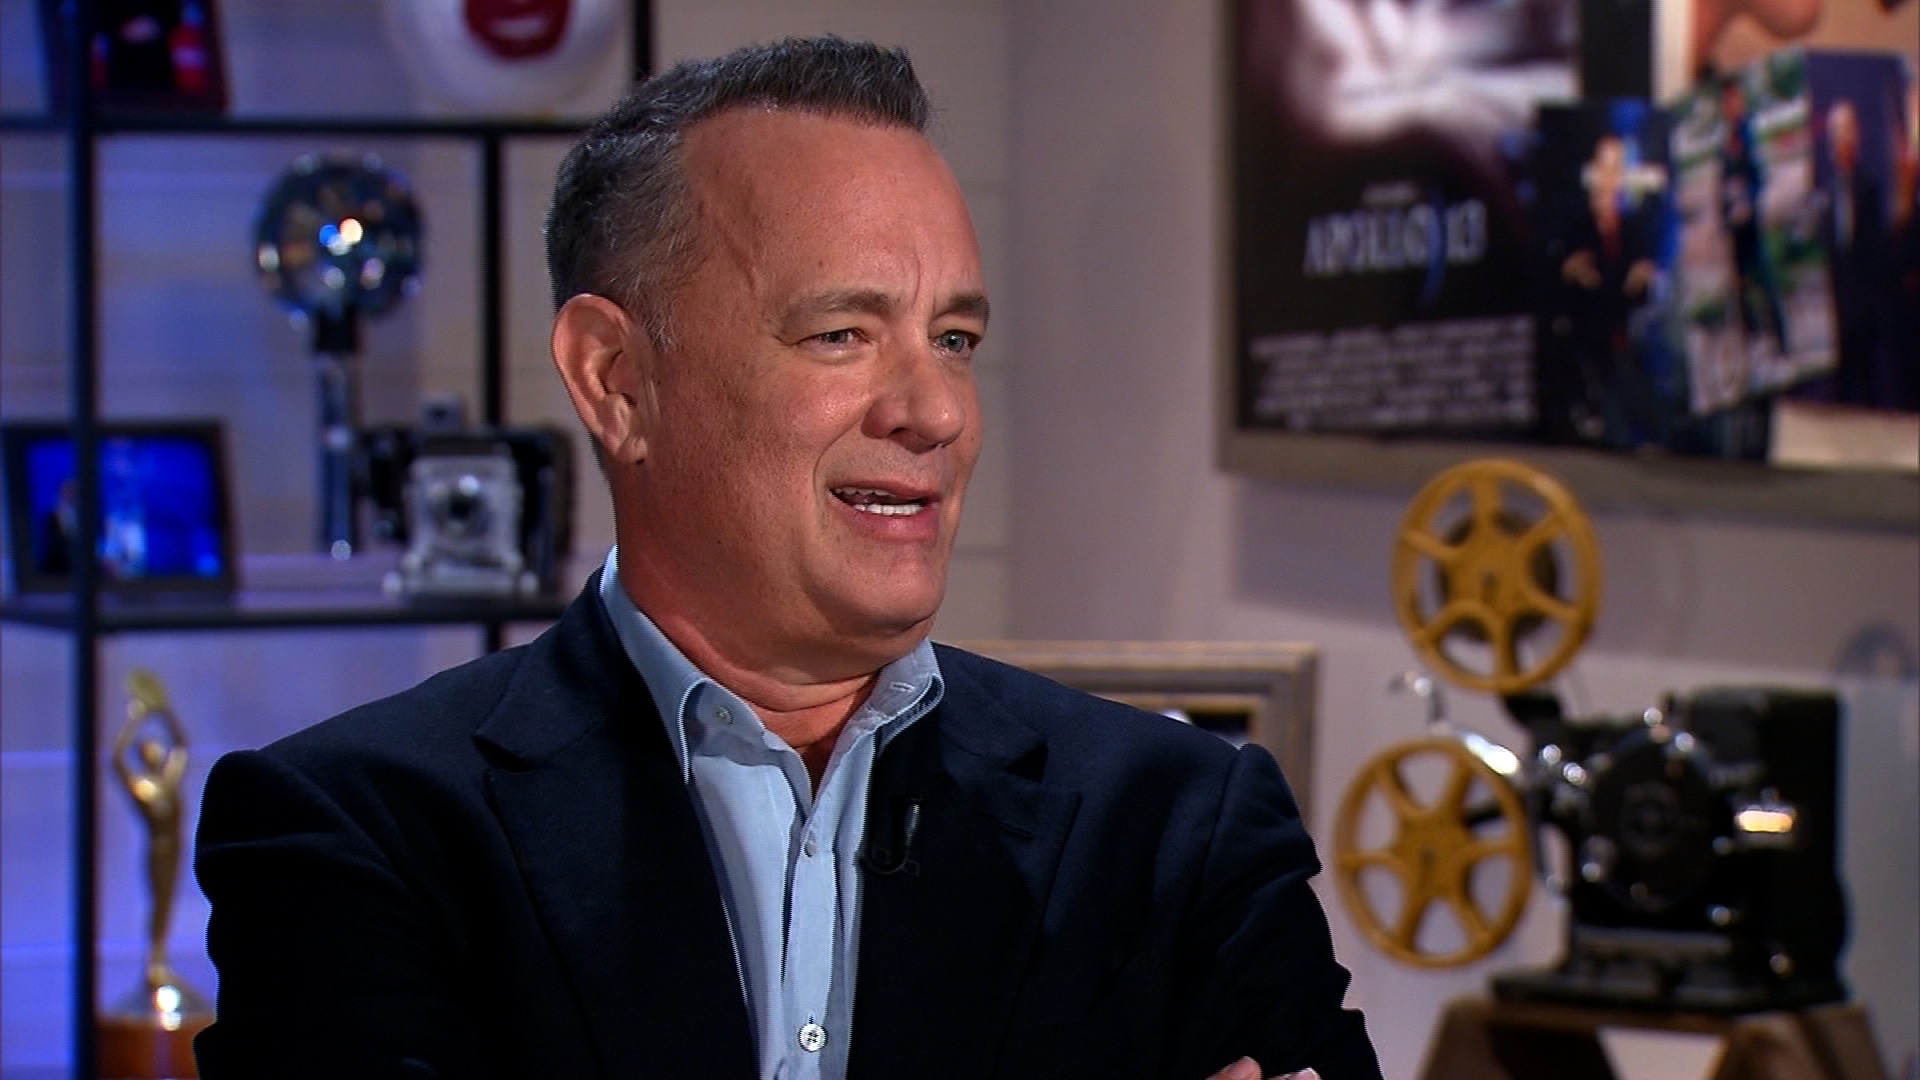 Tom Hanks pledges support for Hollywood sexual abuse victims | CNN